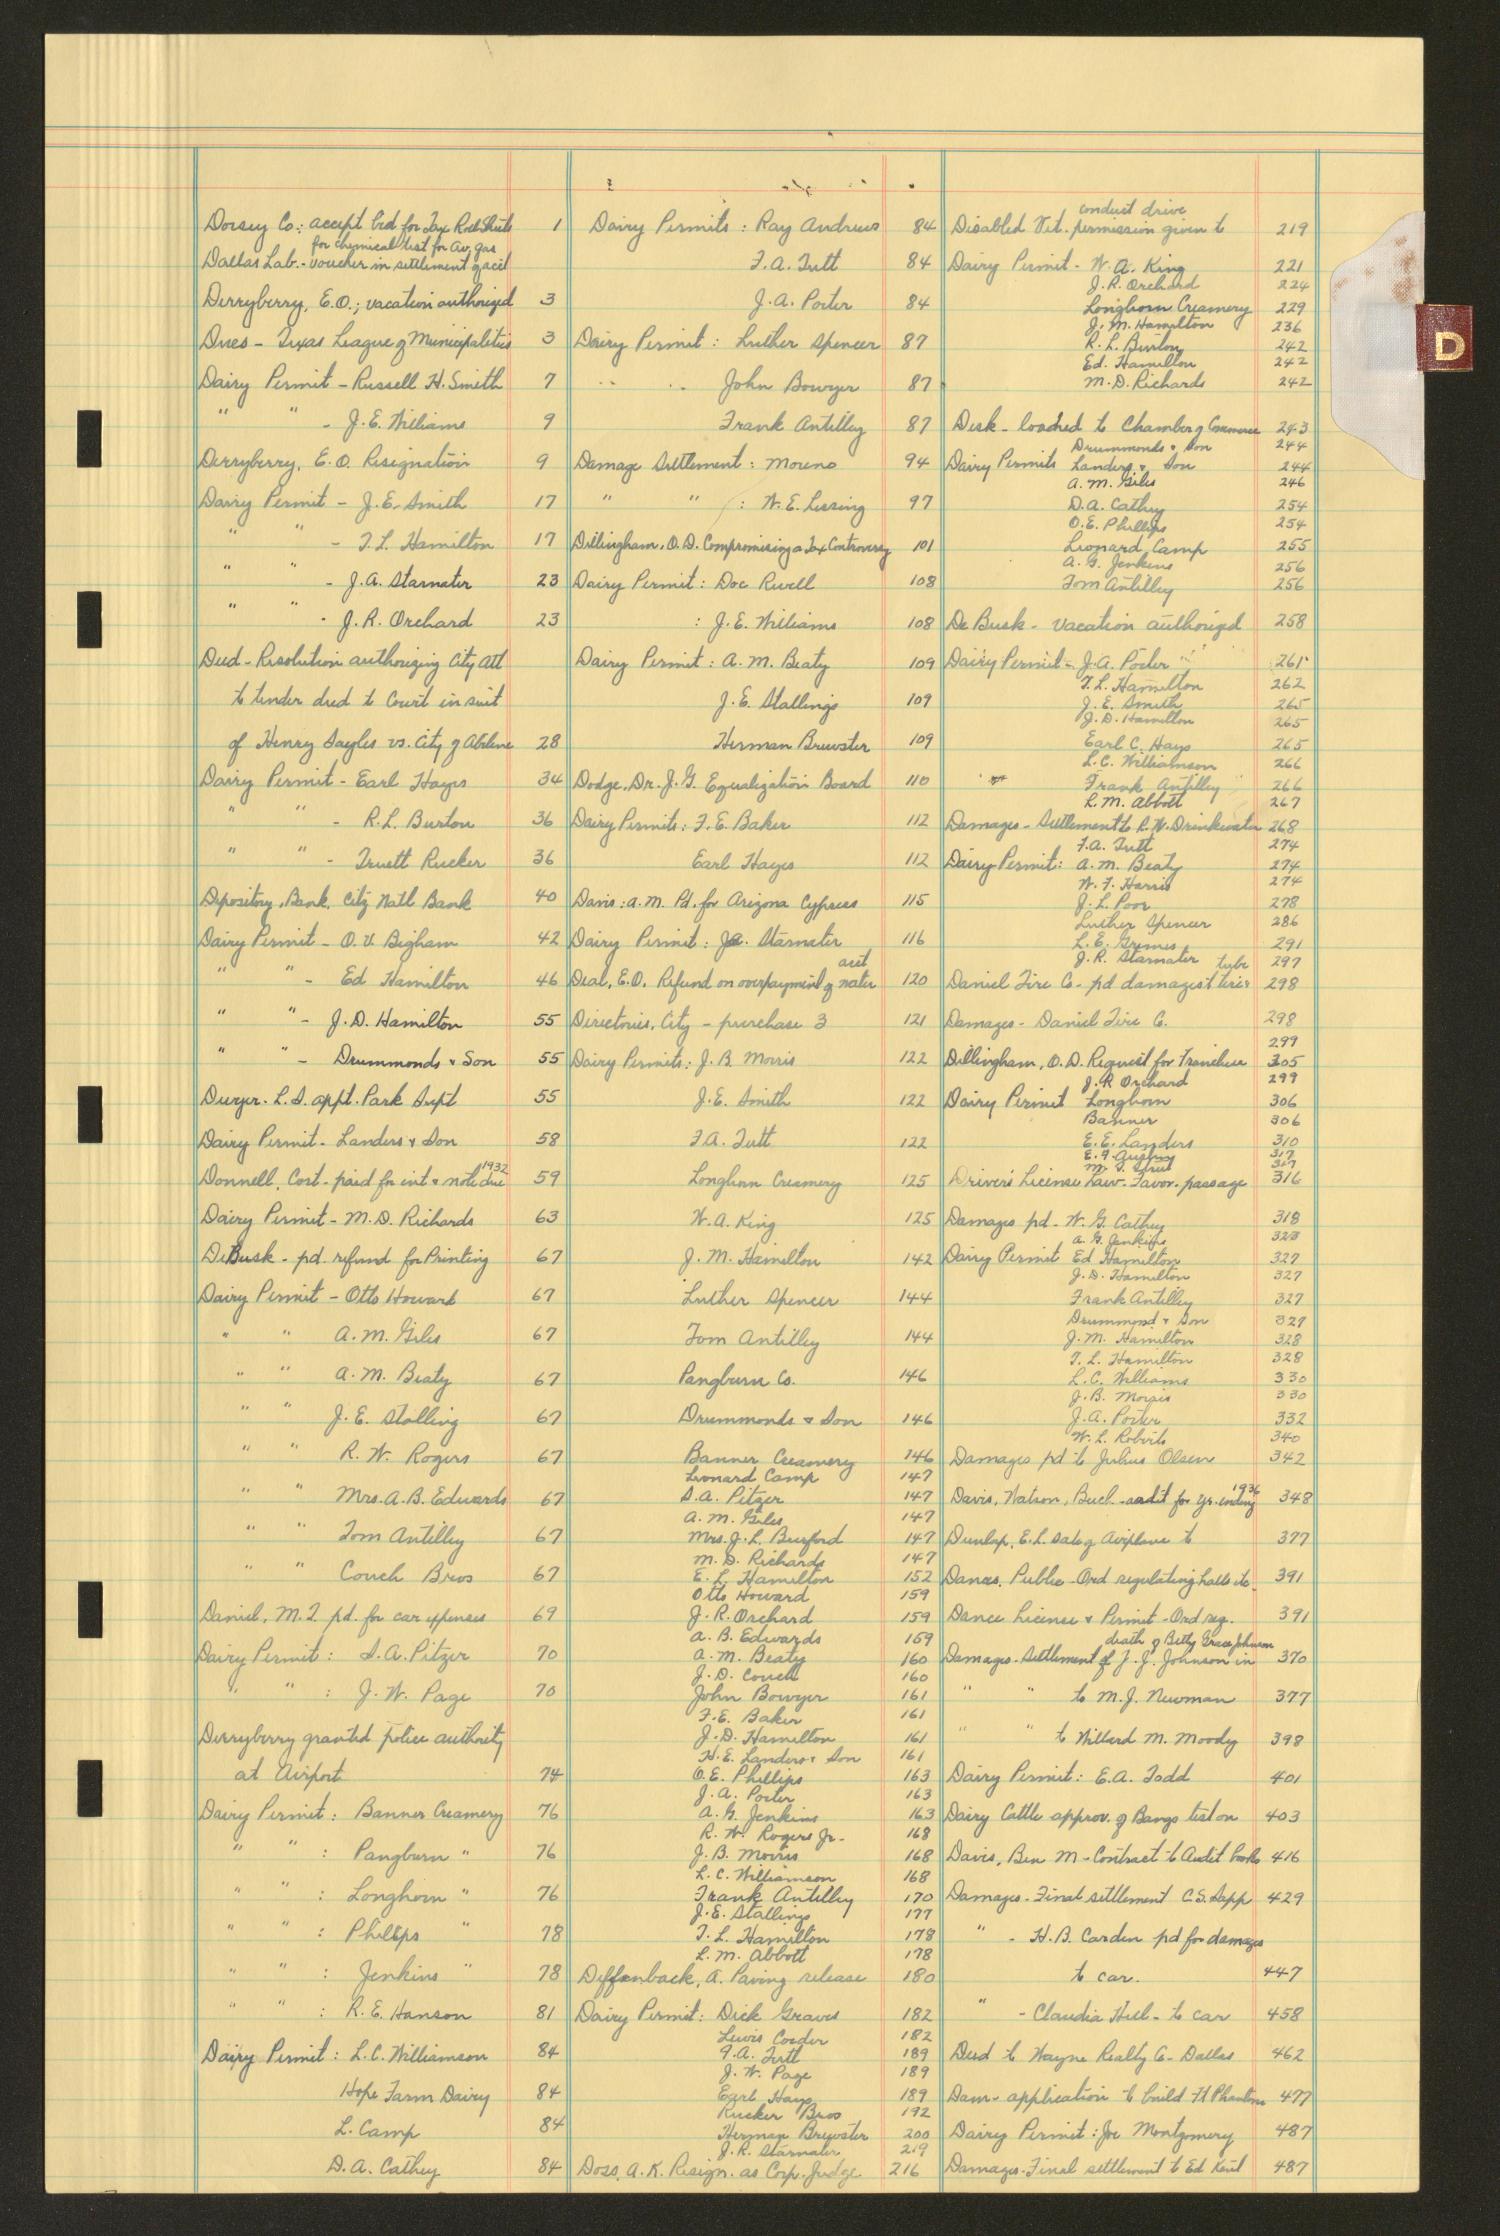 [Abilene Board of Commissioners Minutes: 1931-1938]
                                                
                                                    D
                                                